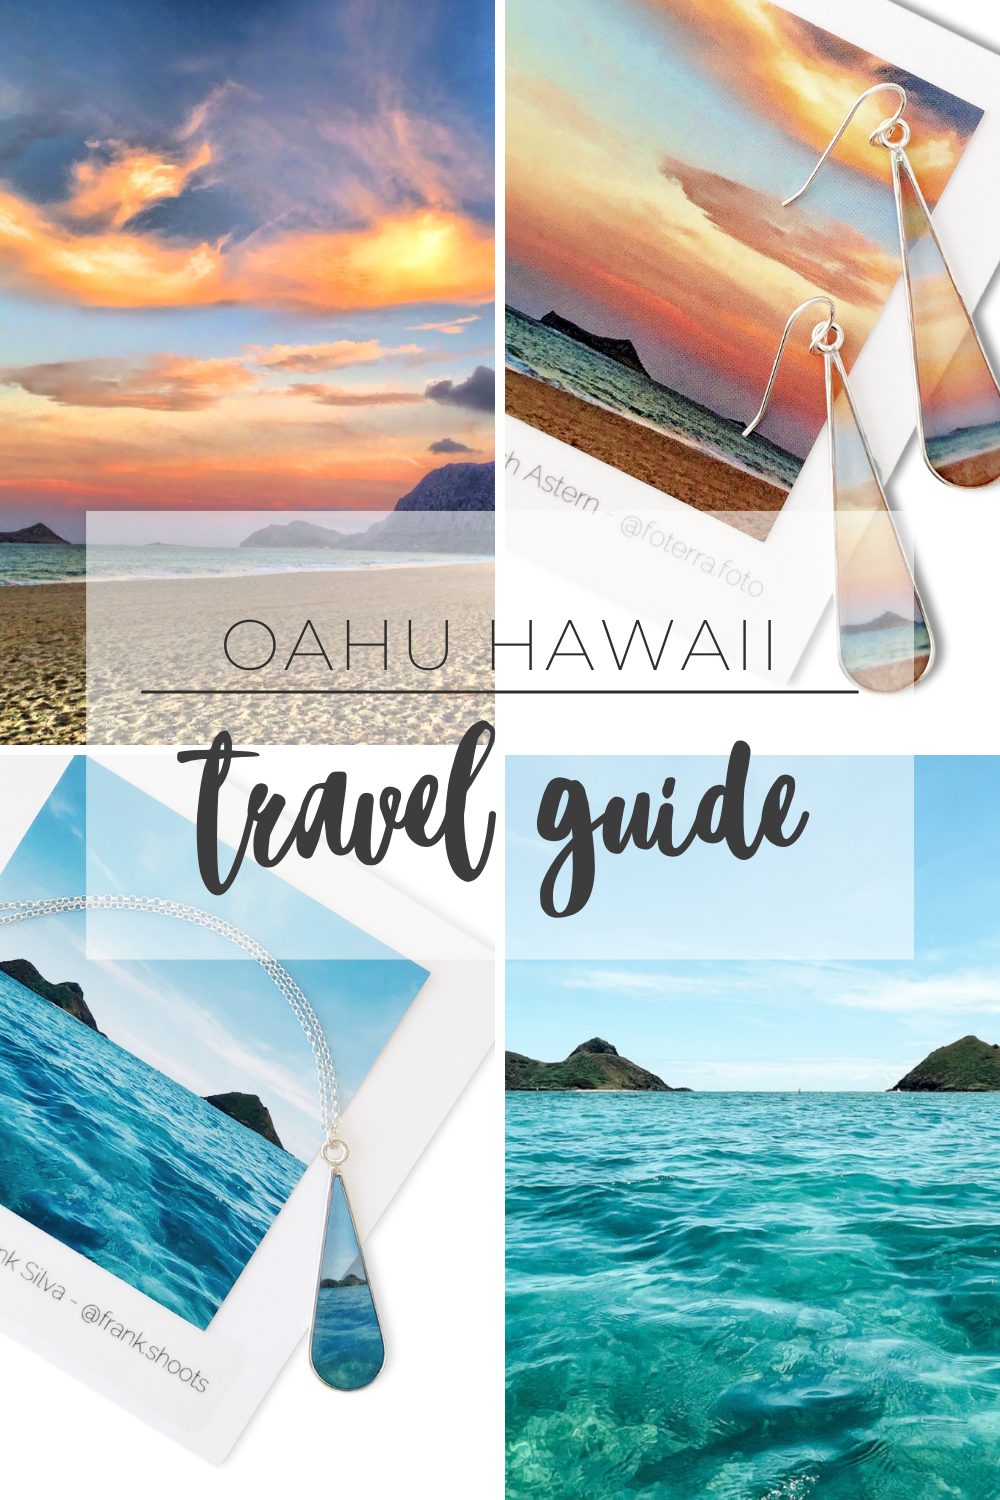 The Best Beaches to Visit on Oahu Hawaii